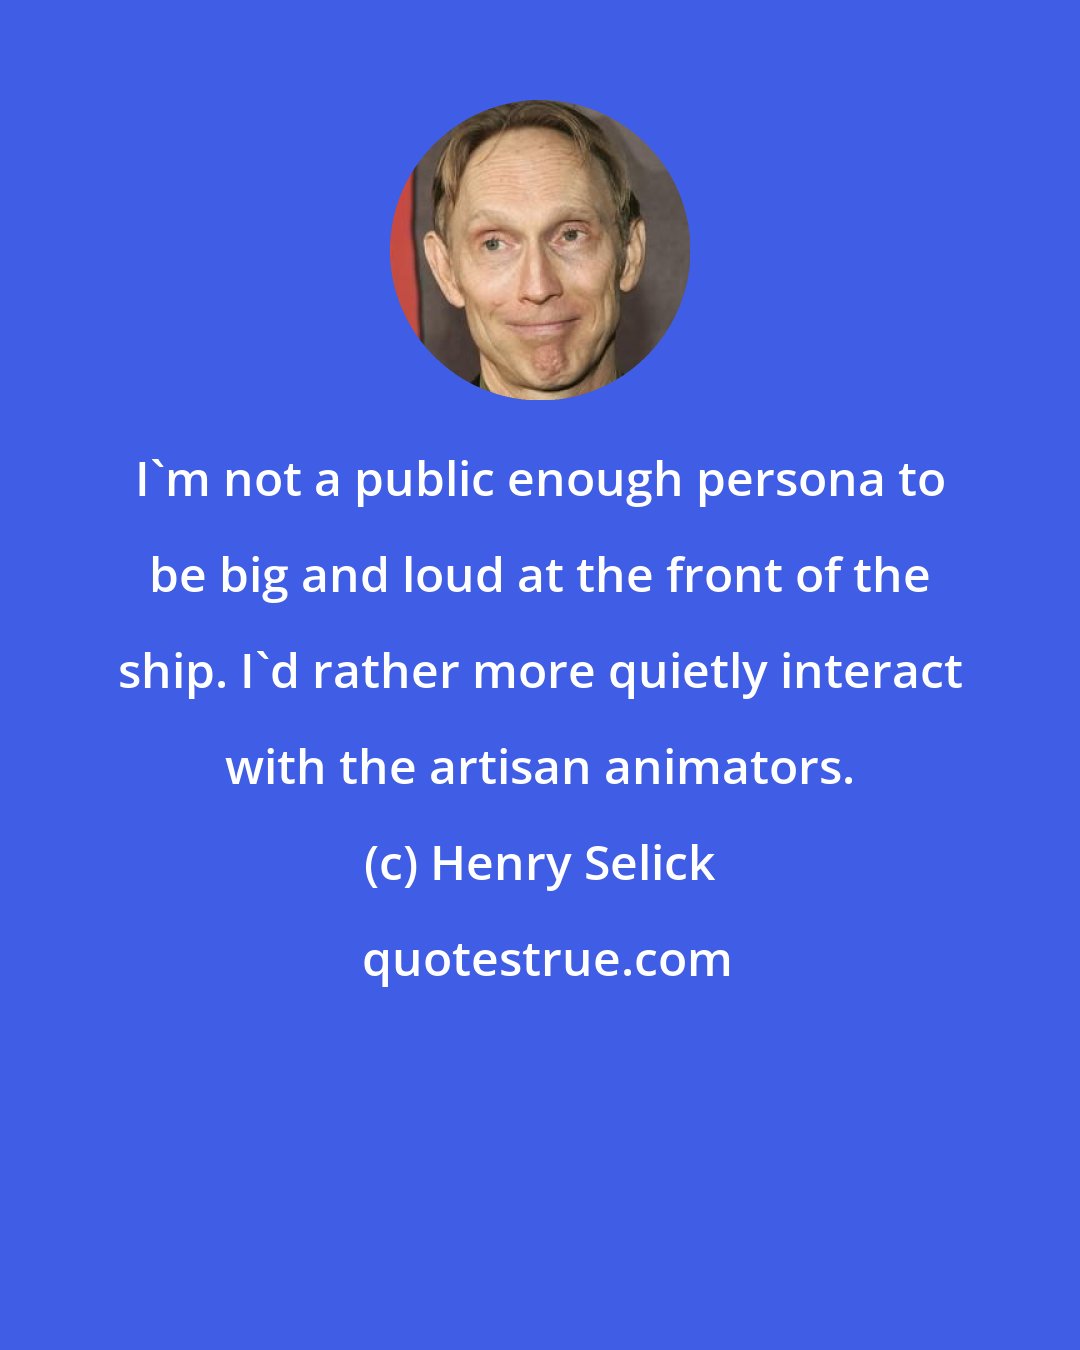 Henry Selick: I'm not a public enough persona to be big and loud at the front of the ship. I'd rather more quietly interact with the artisan animators.